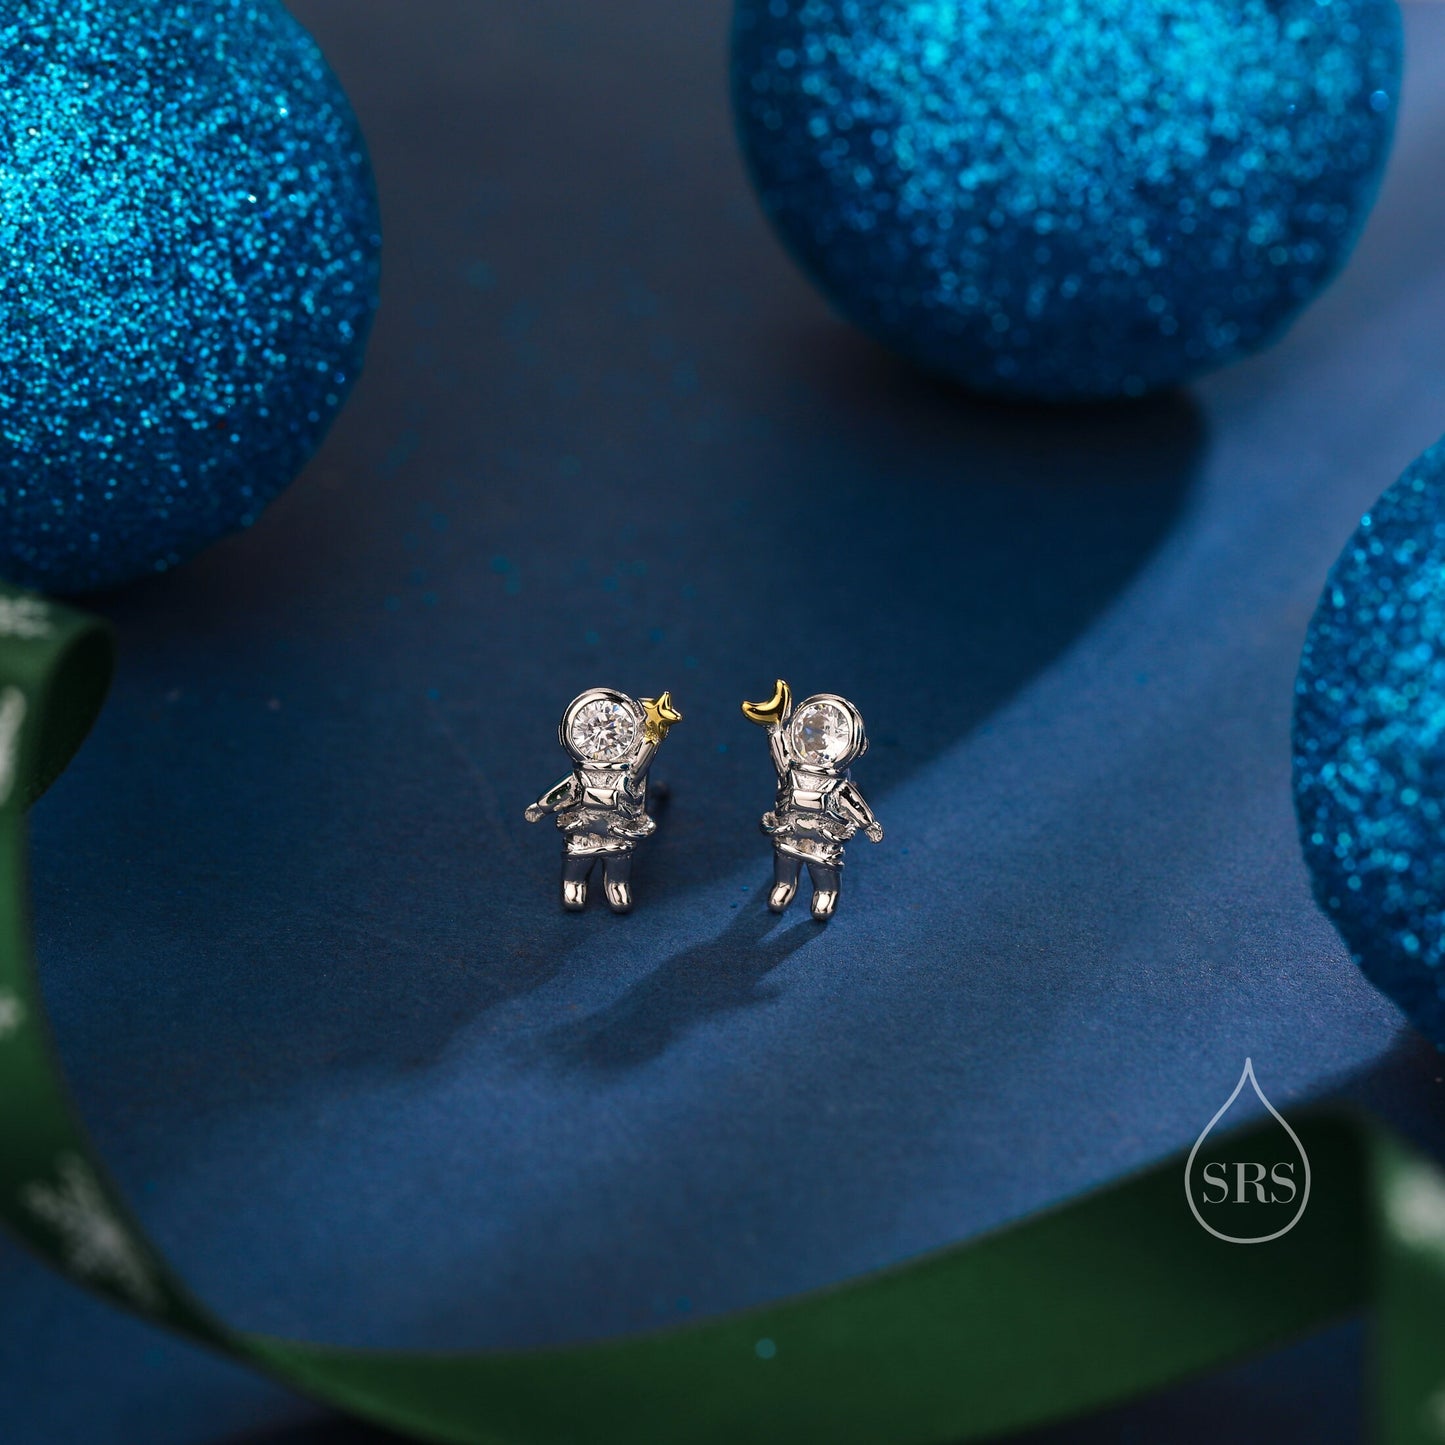 Astronaut Stud Earrings in Sterling Silver, Mismatched Moon and Star Astronaut Earrings, Asymmetric Spaceman Earrings, Blue CZ or Clear CZ